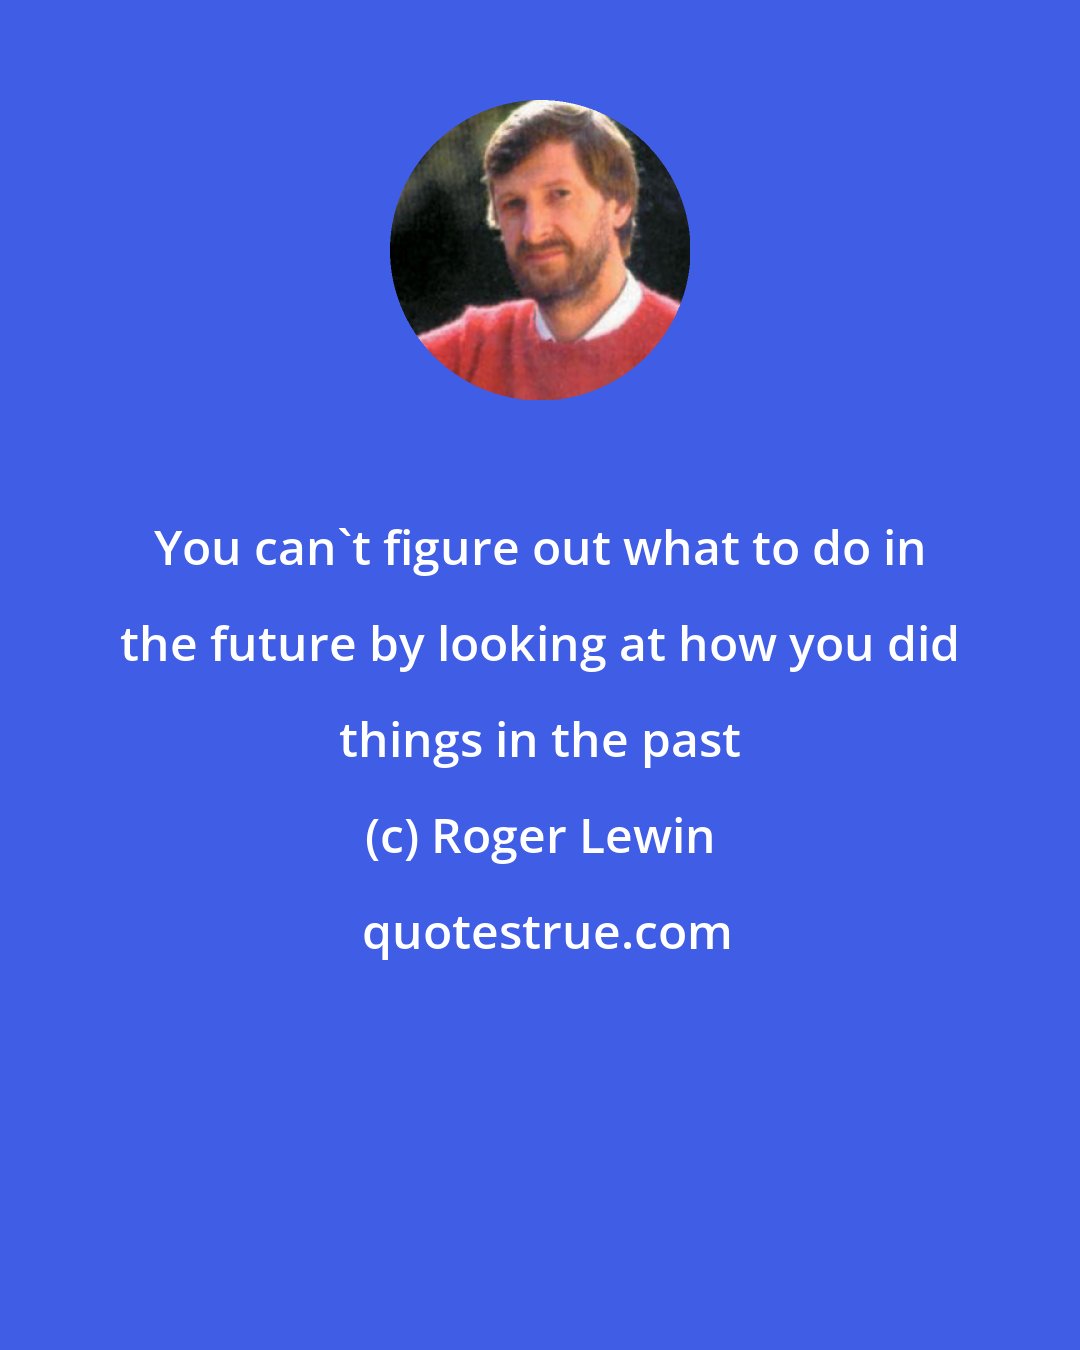 Roger Lewin: You can't figure out what to do in the future by looking at how you did things in the past